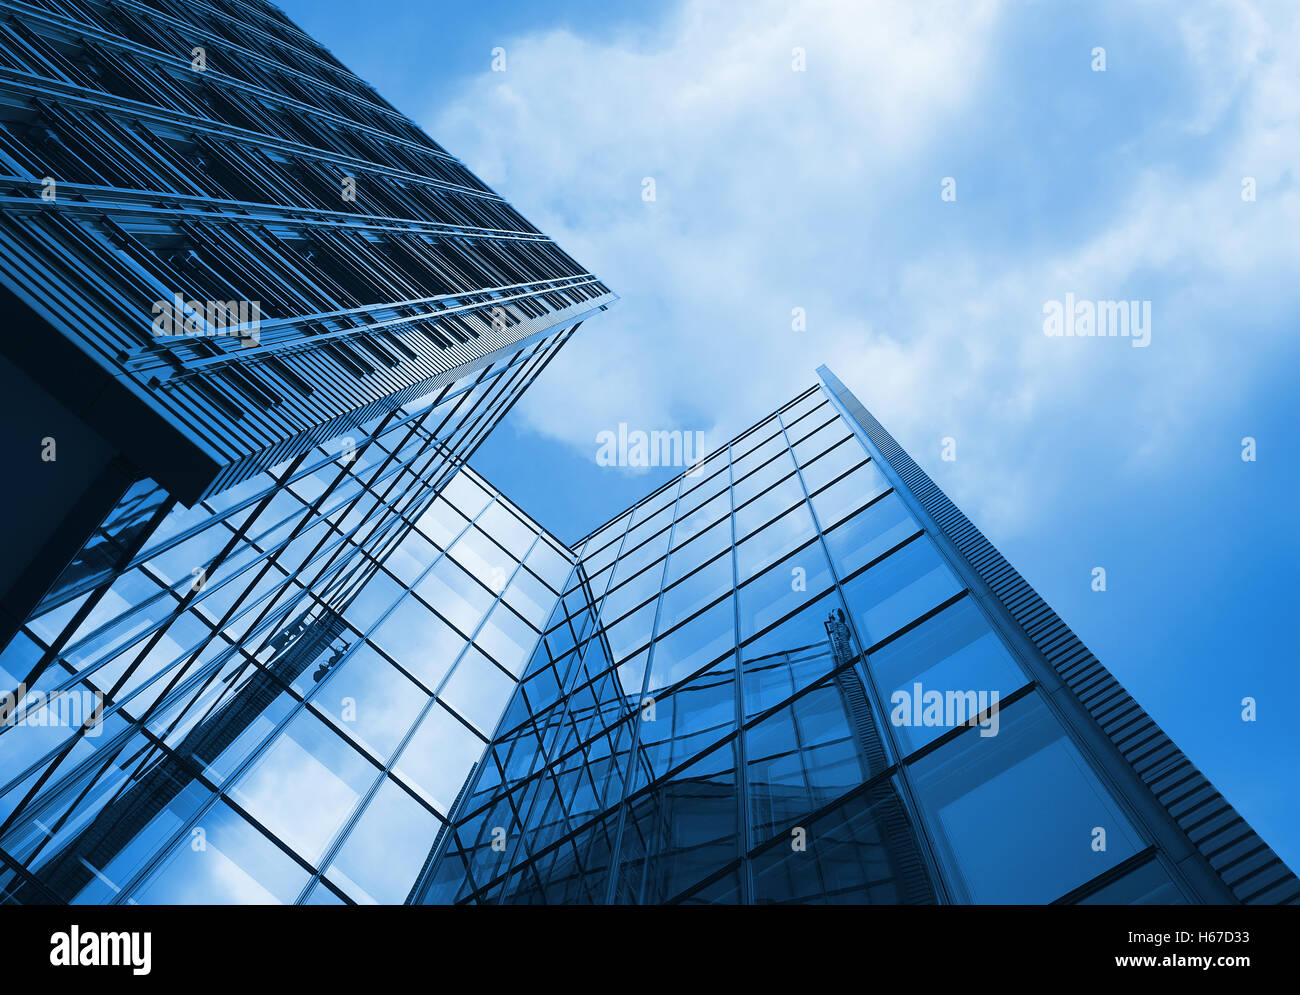 Tall office building with blue tint to whole image Stock Photo - Alamy